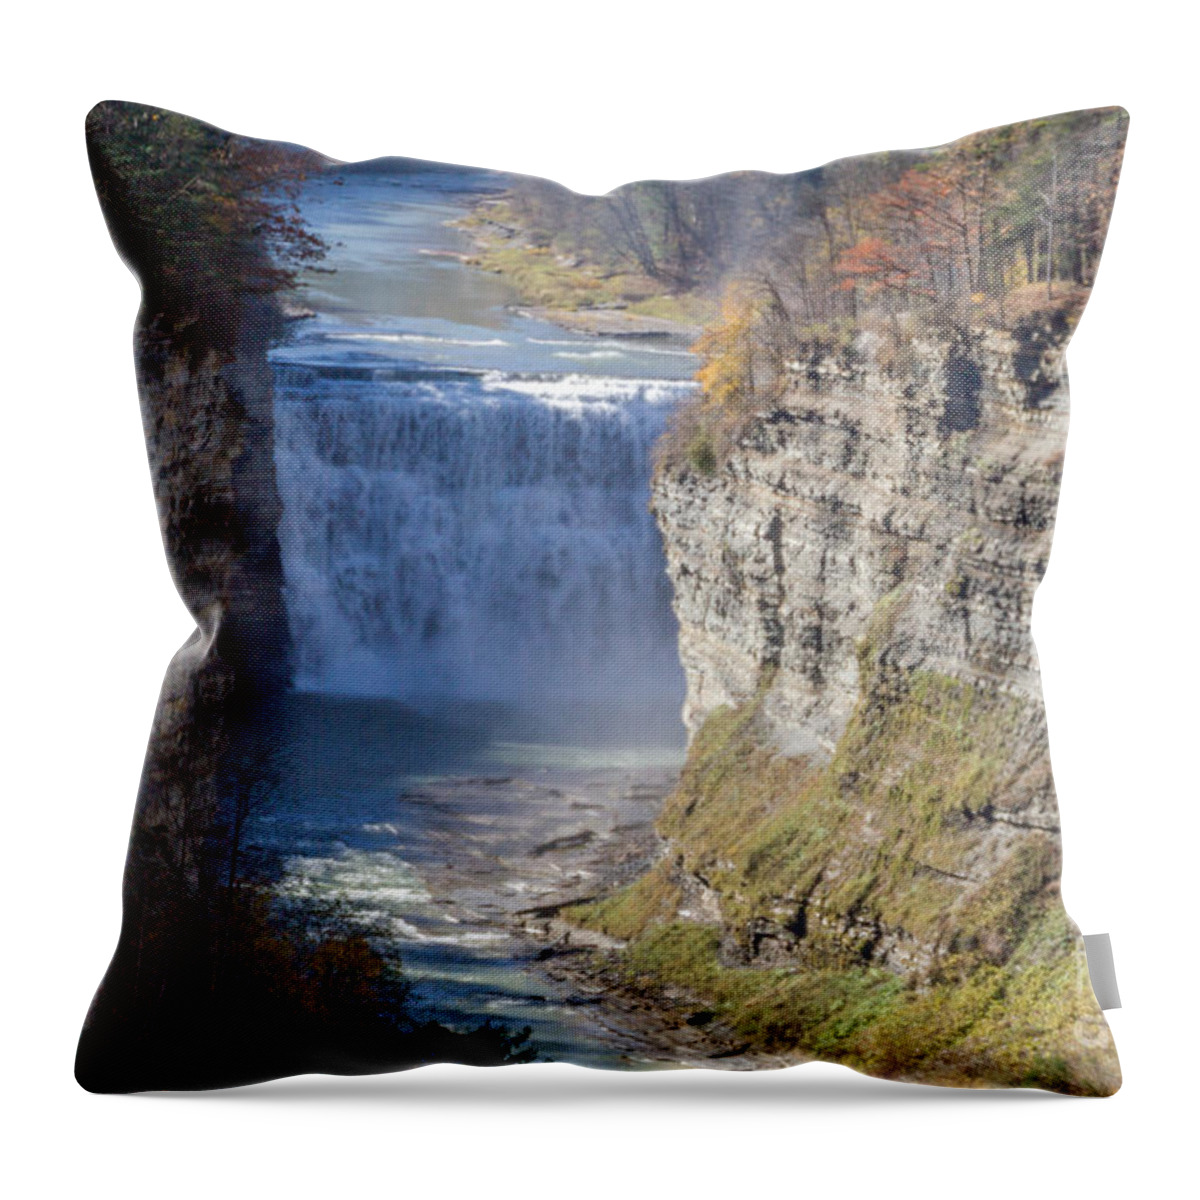 Letchworth Throw Pillow featuring the photograph Letchworth Middle Falls by William Norton